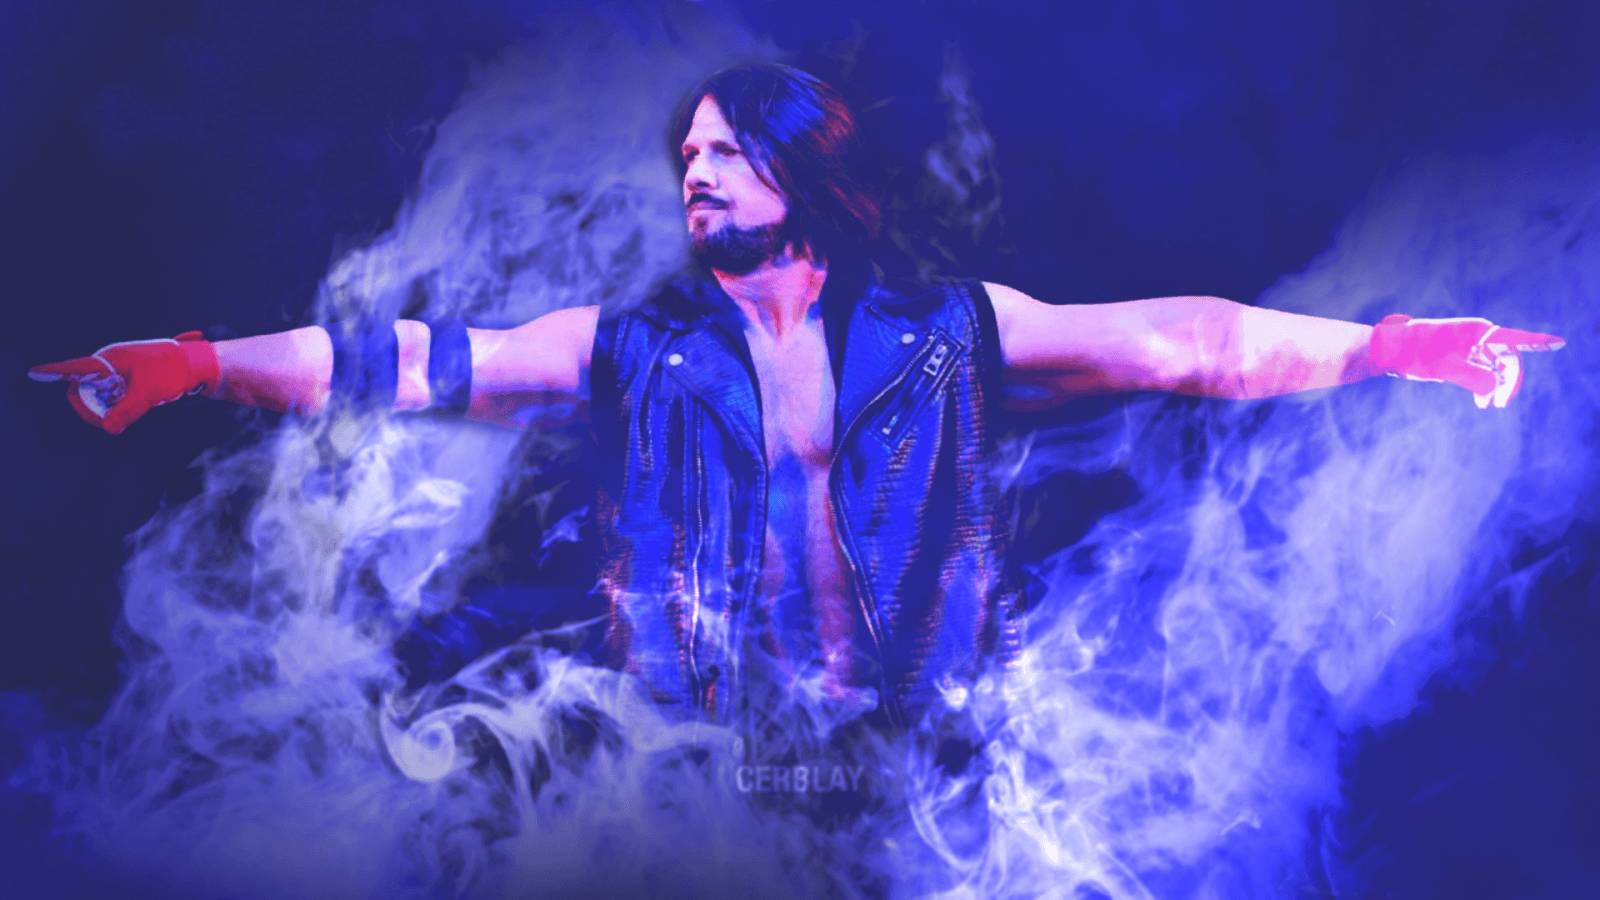 Cerblay's GFX Showcase, Rollins, AJ Styles and more